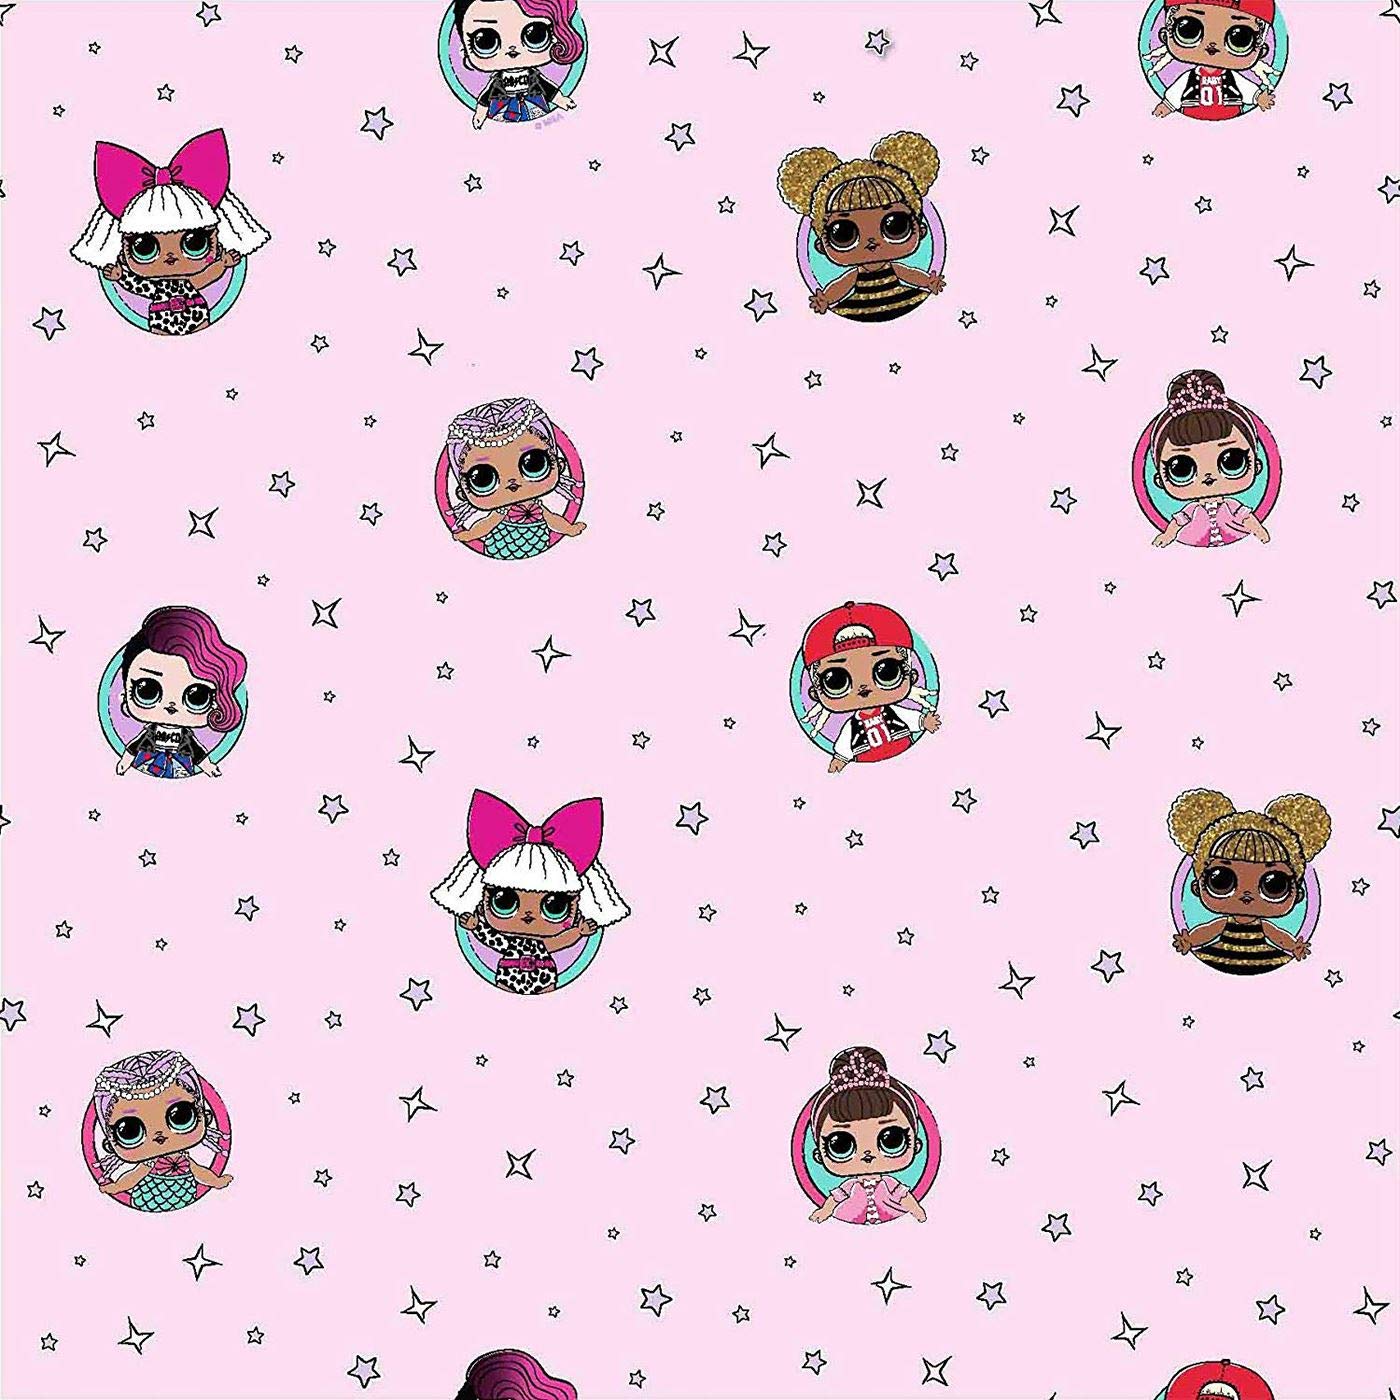 Lol Surprise Wallpapers Top Free Lol Surprise Backgrounds Wallpaperaccess Lol surprise dolls, blind bag toys, hairdorables, hot new toys for kids. lol surprise wallpapers top free lol